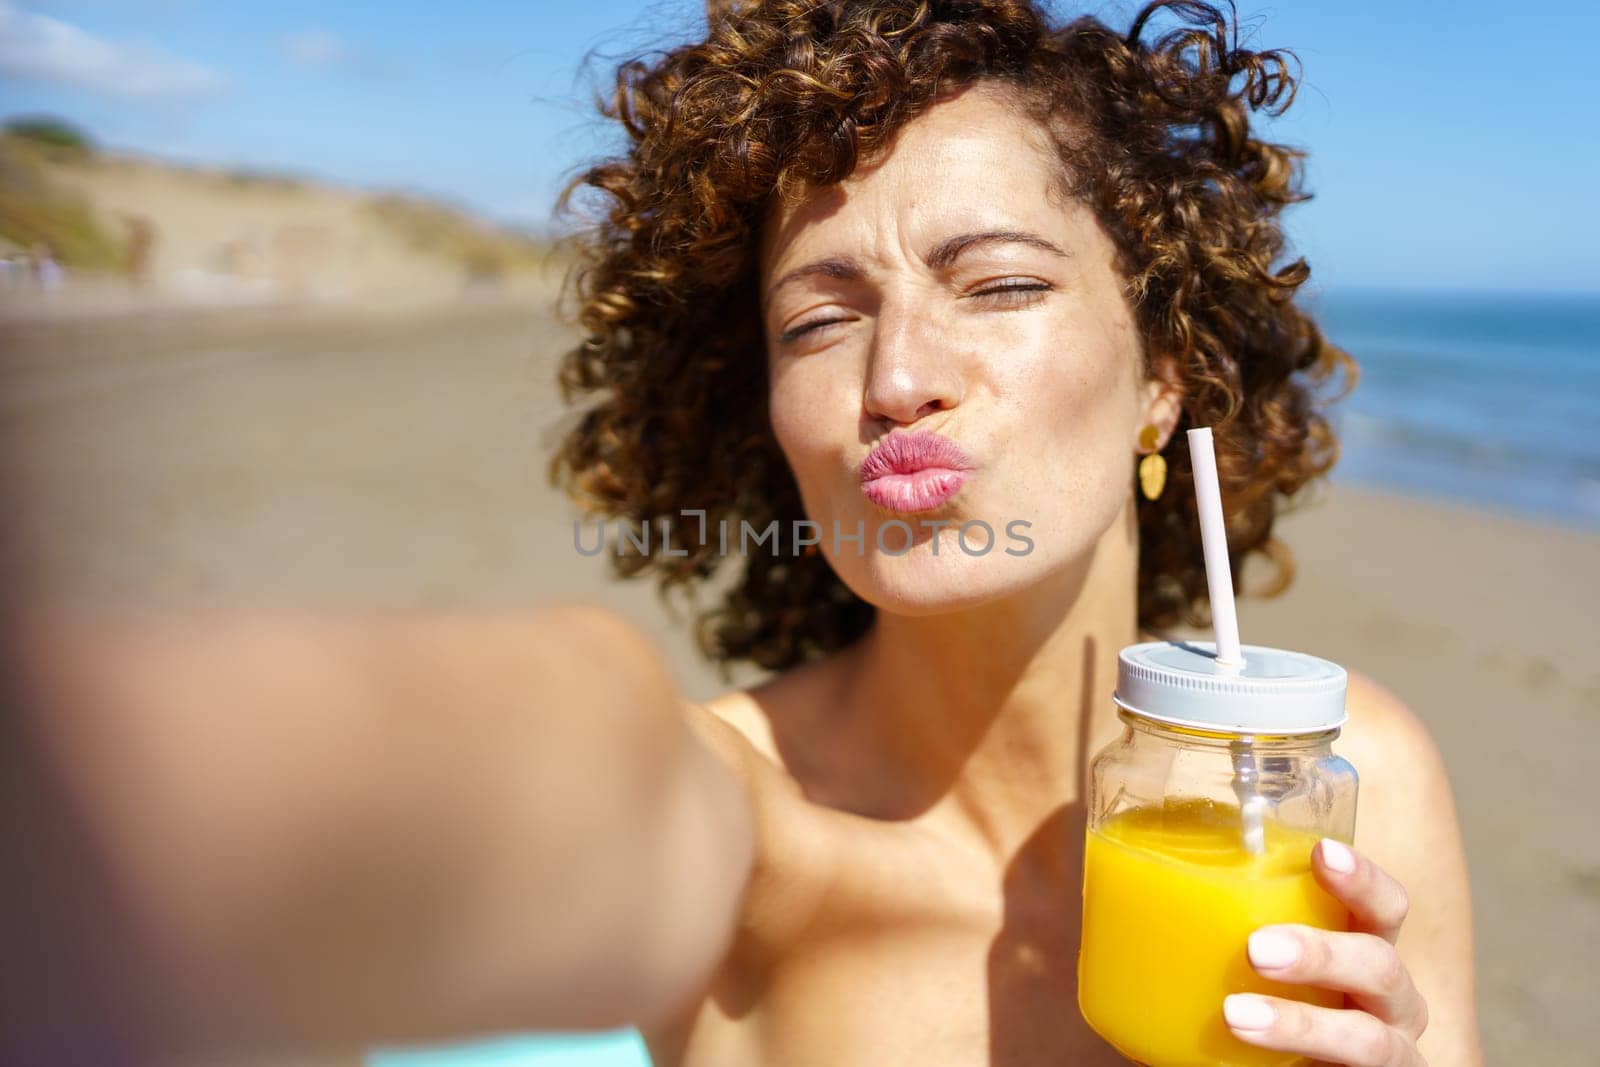 Young female with curly hair and closed eyes blowing kiss and holding jar of orange juice while taking selfie on beach during summer vacation